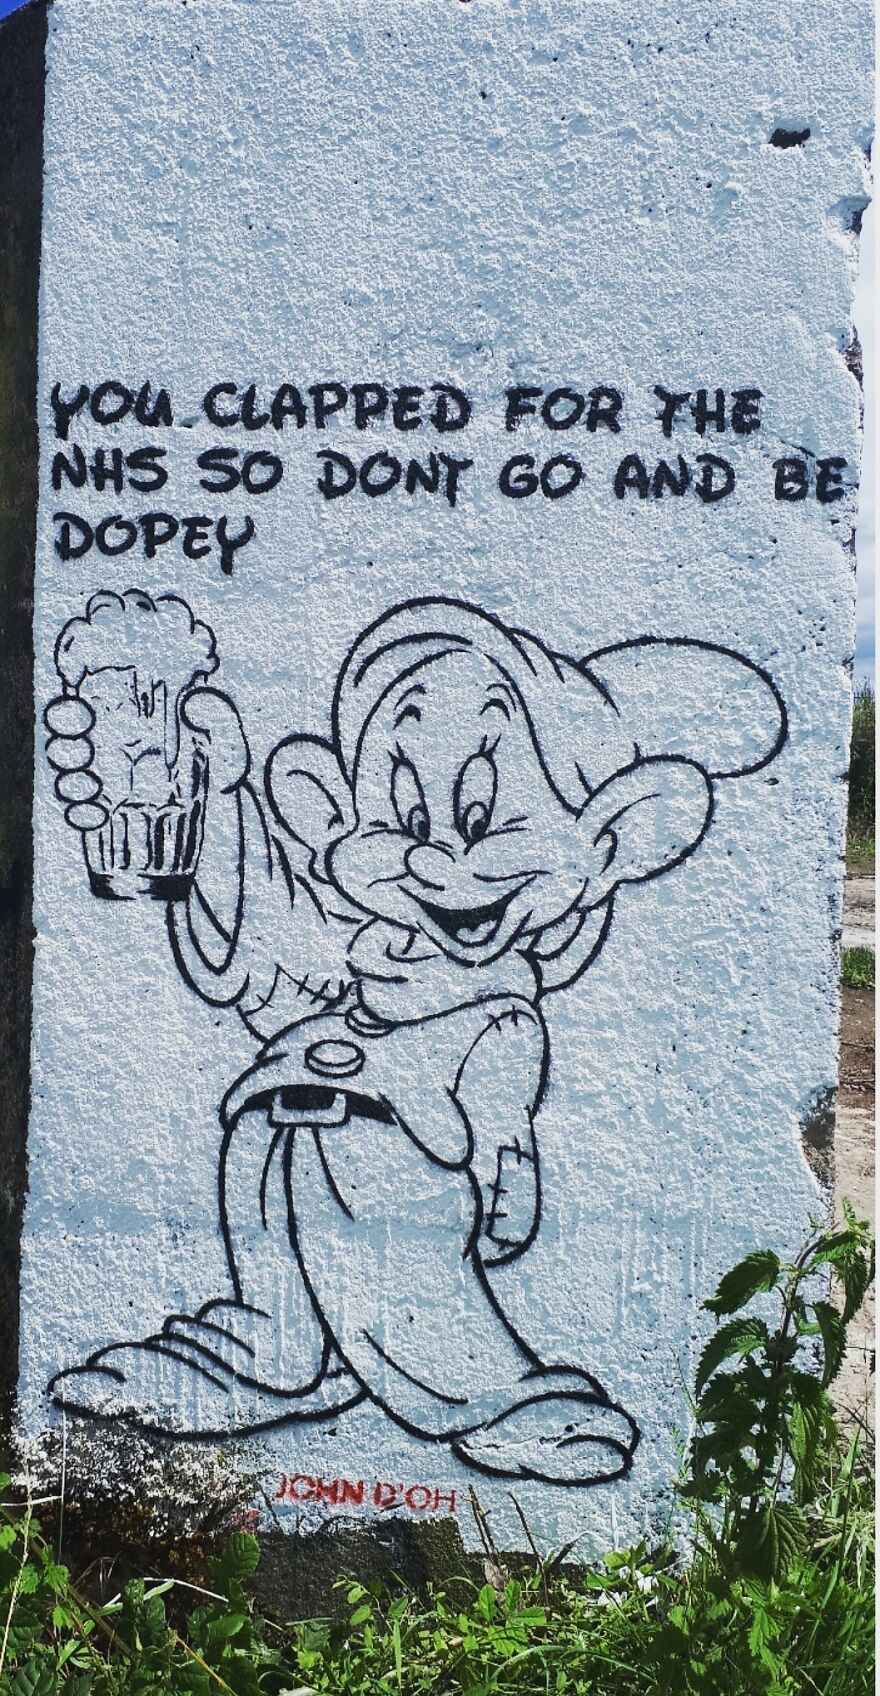 Don't Be Dopey Drink Responsibly.painted In Bristol